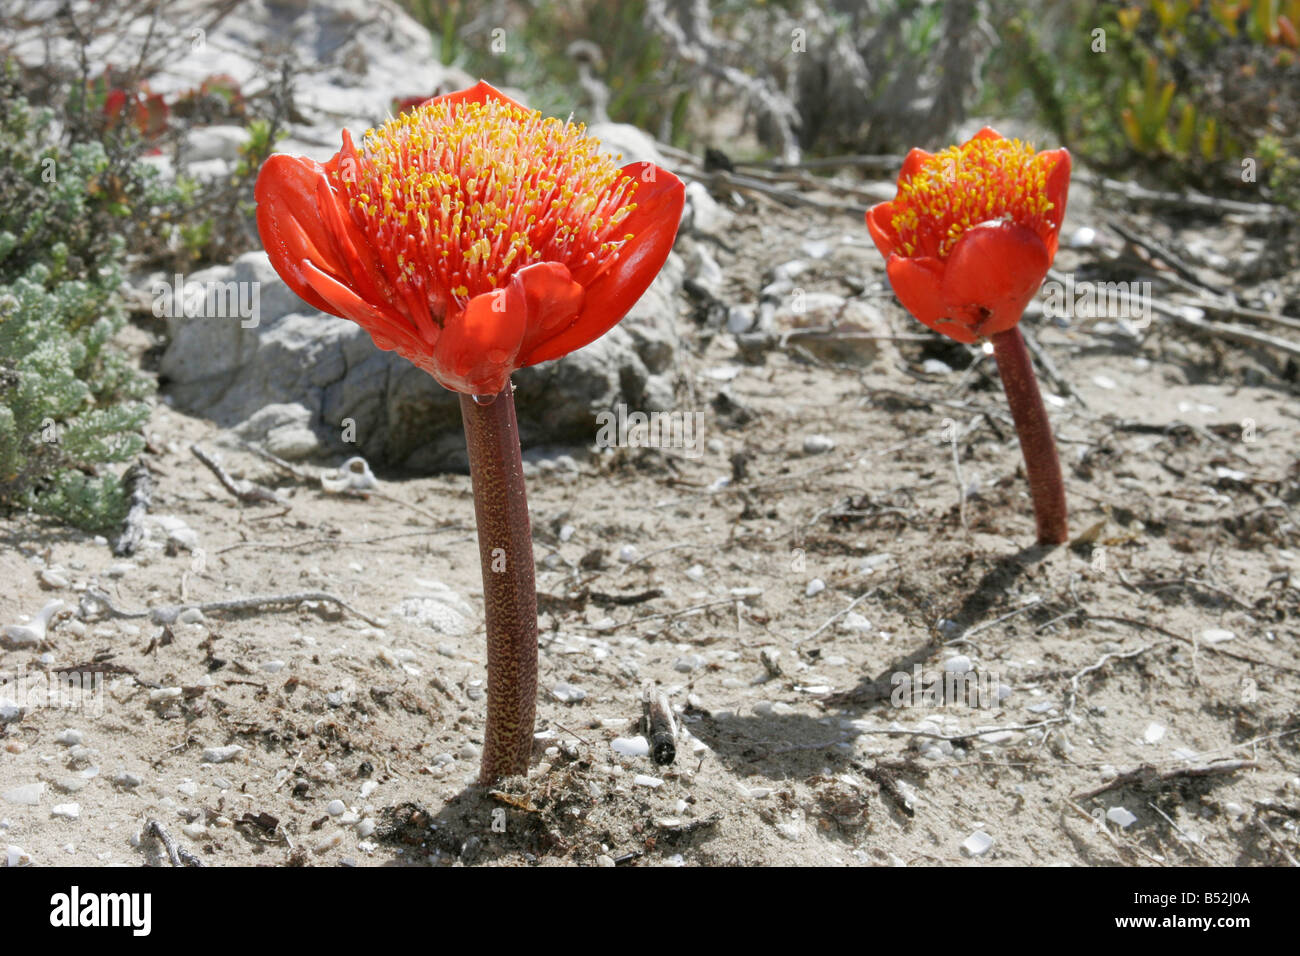 Haemanthus Pubescens commonly known as the powder brush found in coastal region of south western South Africa Stock Photo